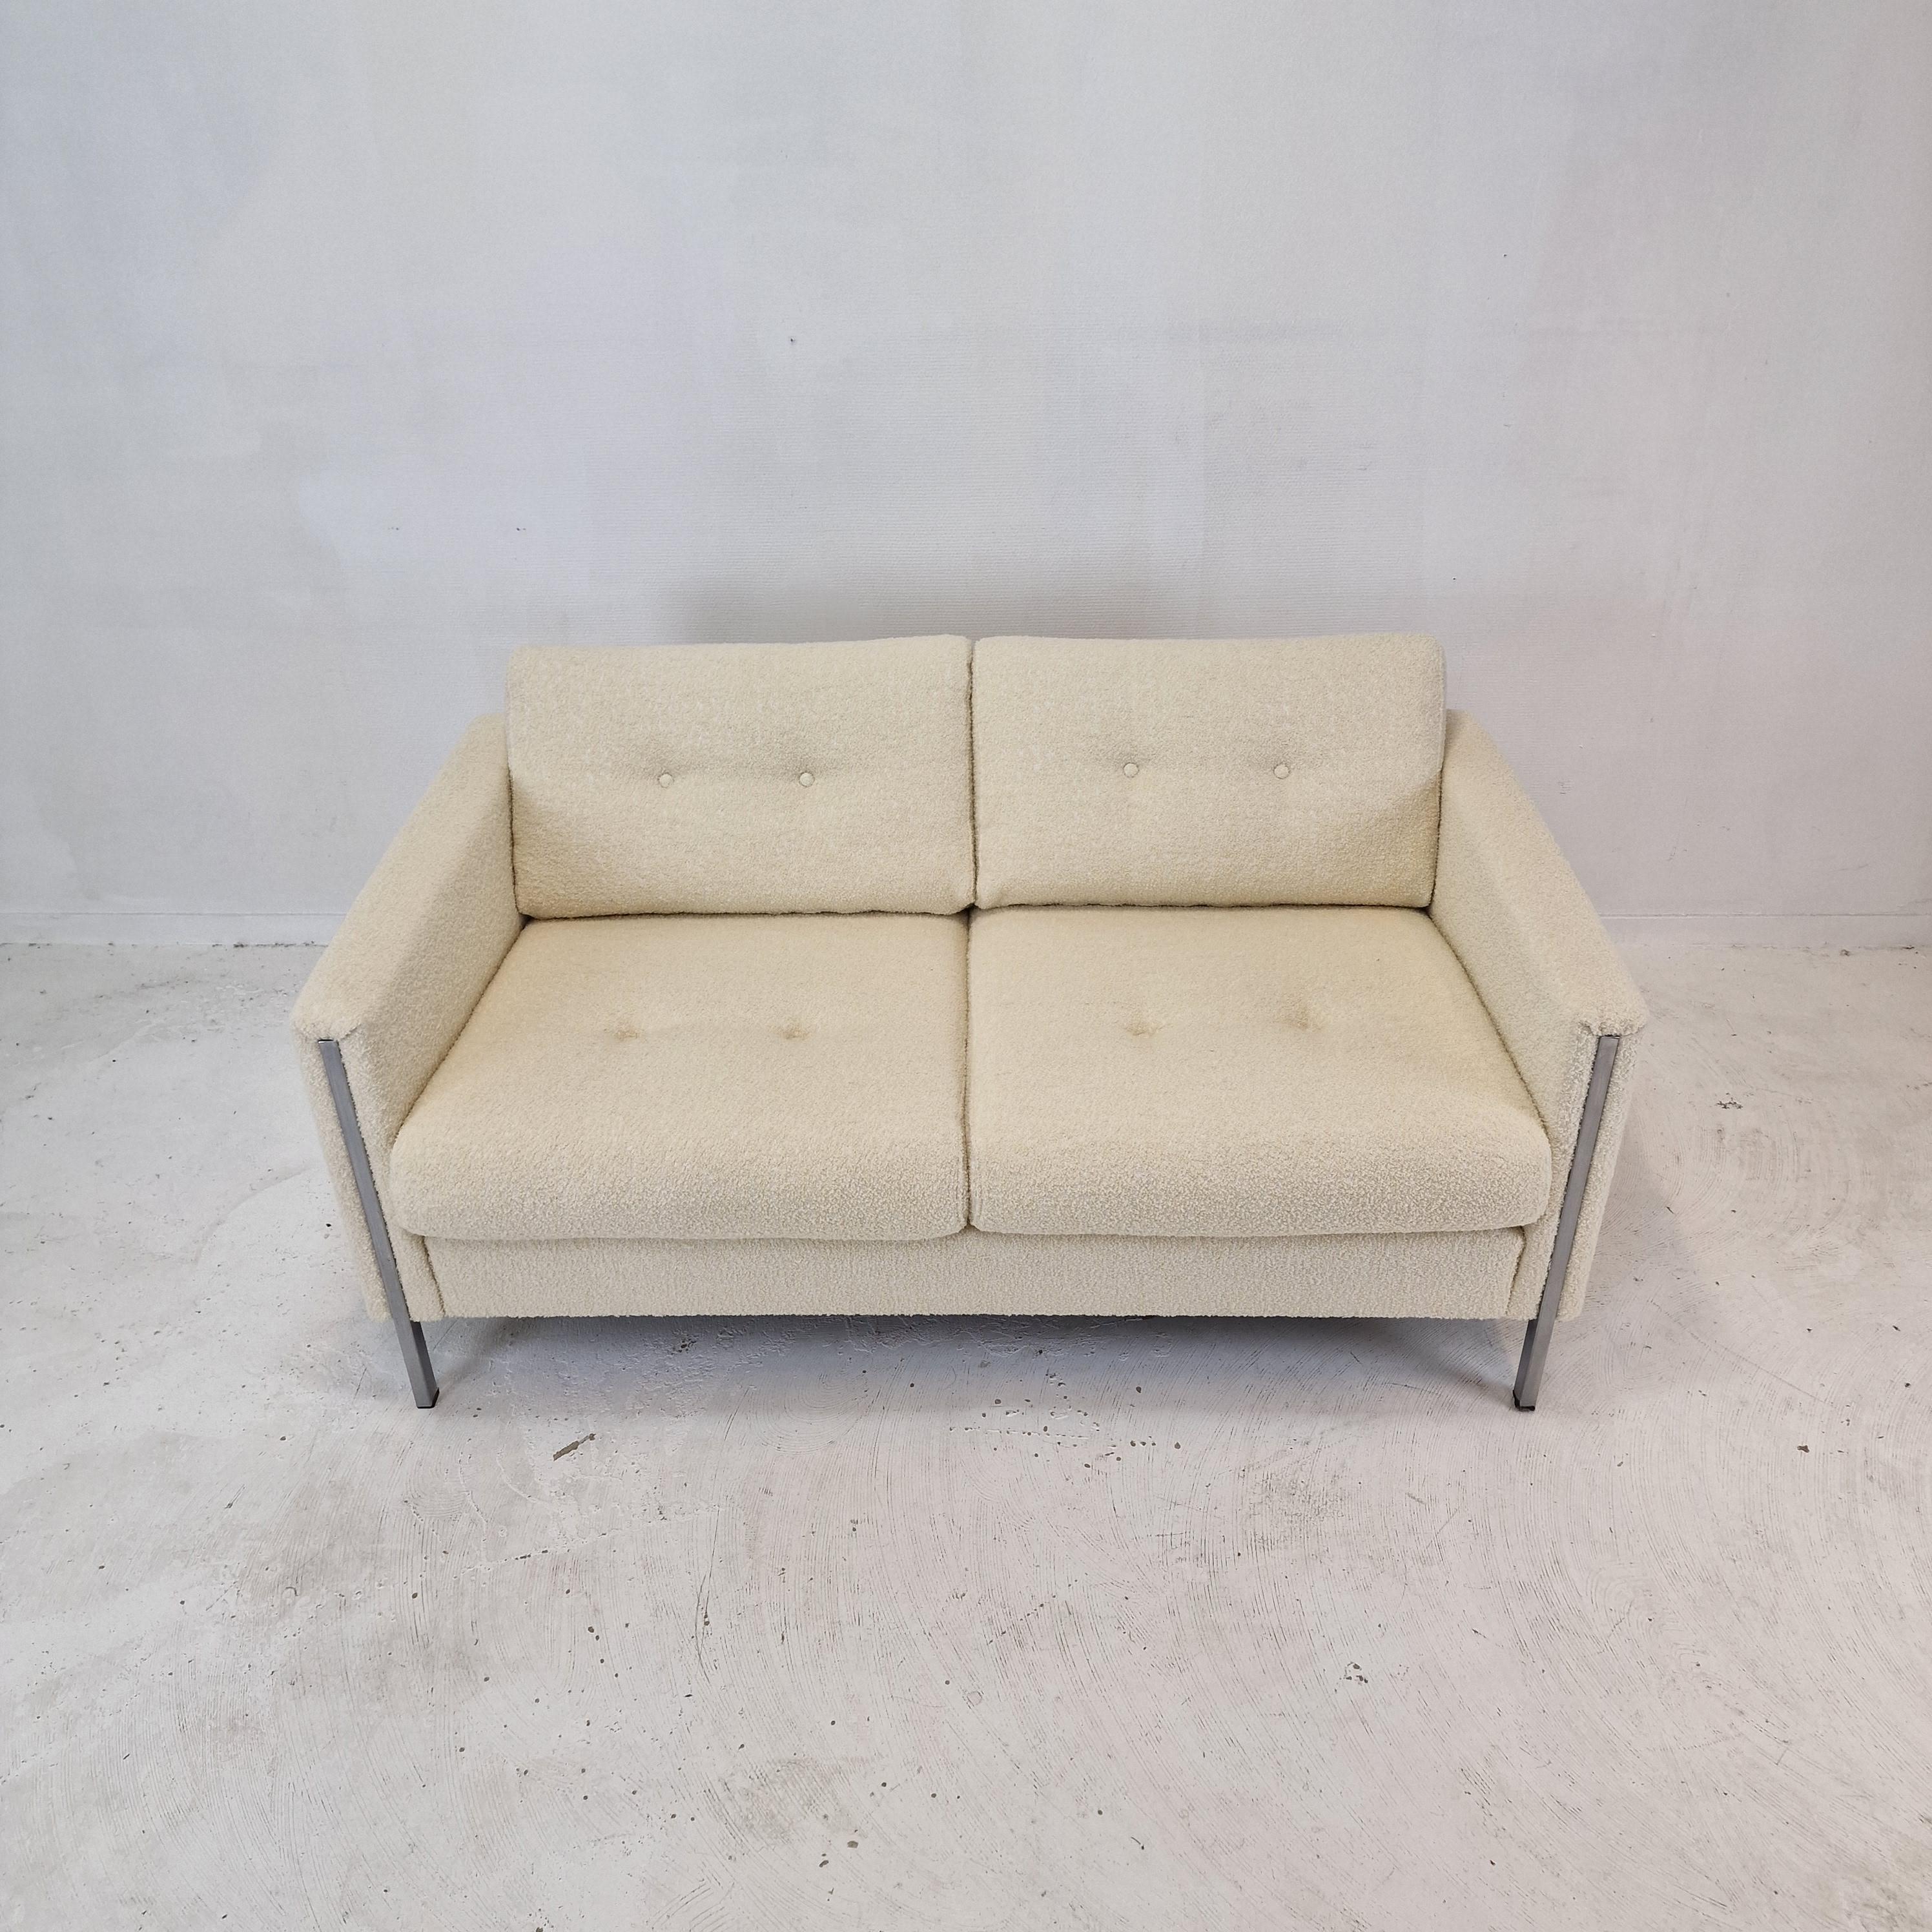 Woven Midcentury 2-Seat Model 442 Sofa by Pierre Paulin for Artifort, 1960s For Sale